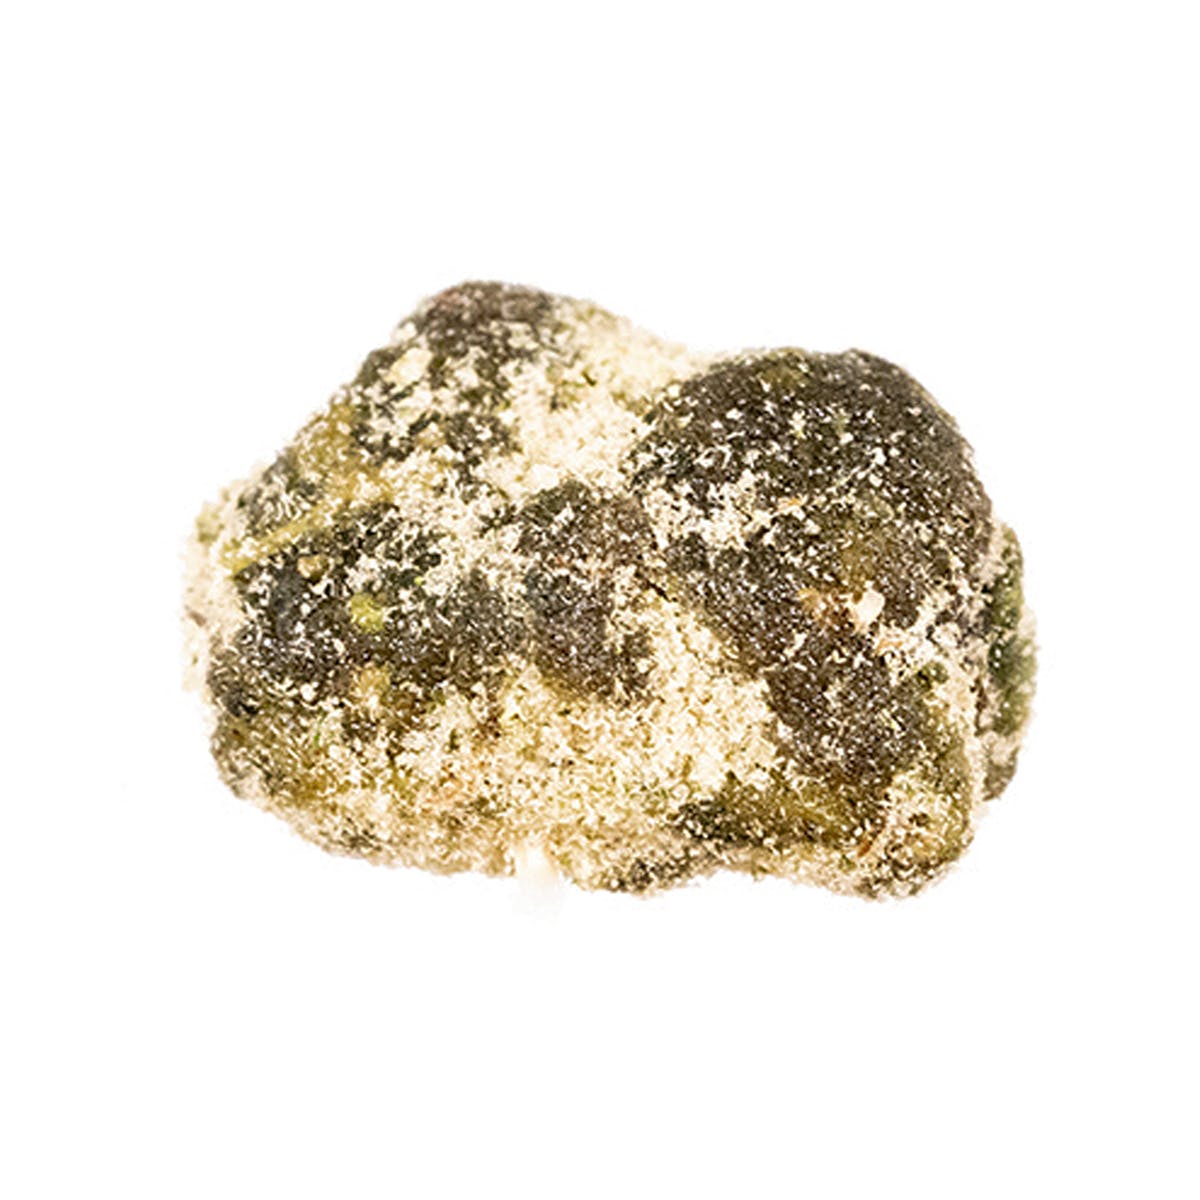 Space Rock (.5g)